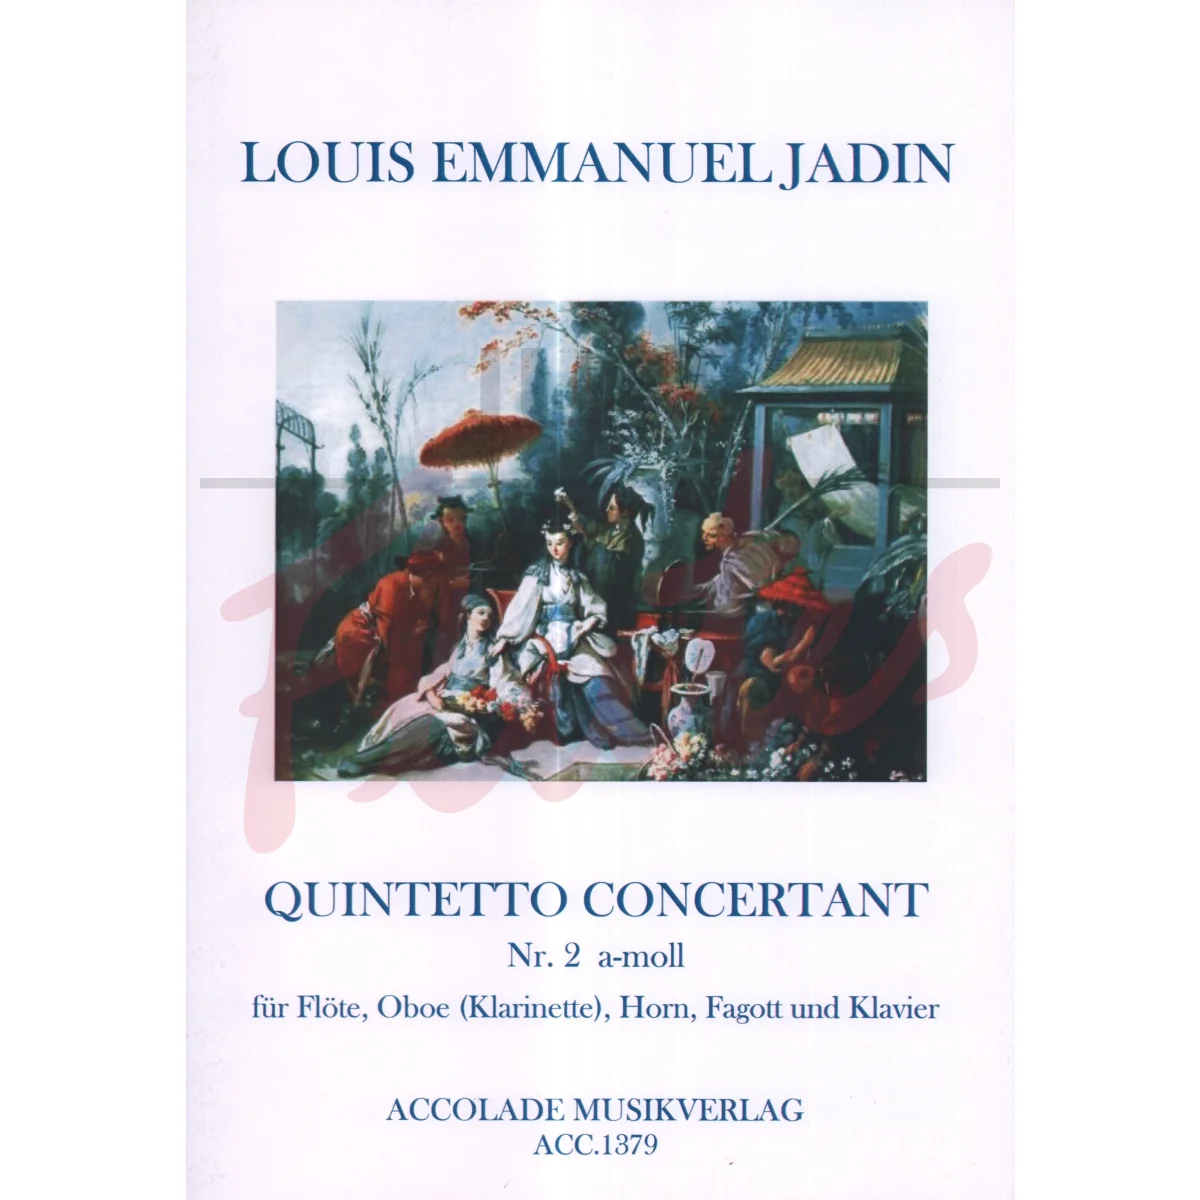 Quintetto Concertant No.2 in A minor for Flute, Oboe/Clarinet, Horn, Bassoon and Piano